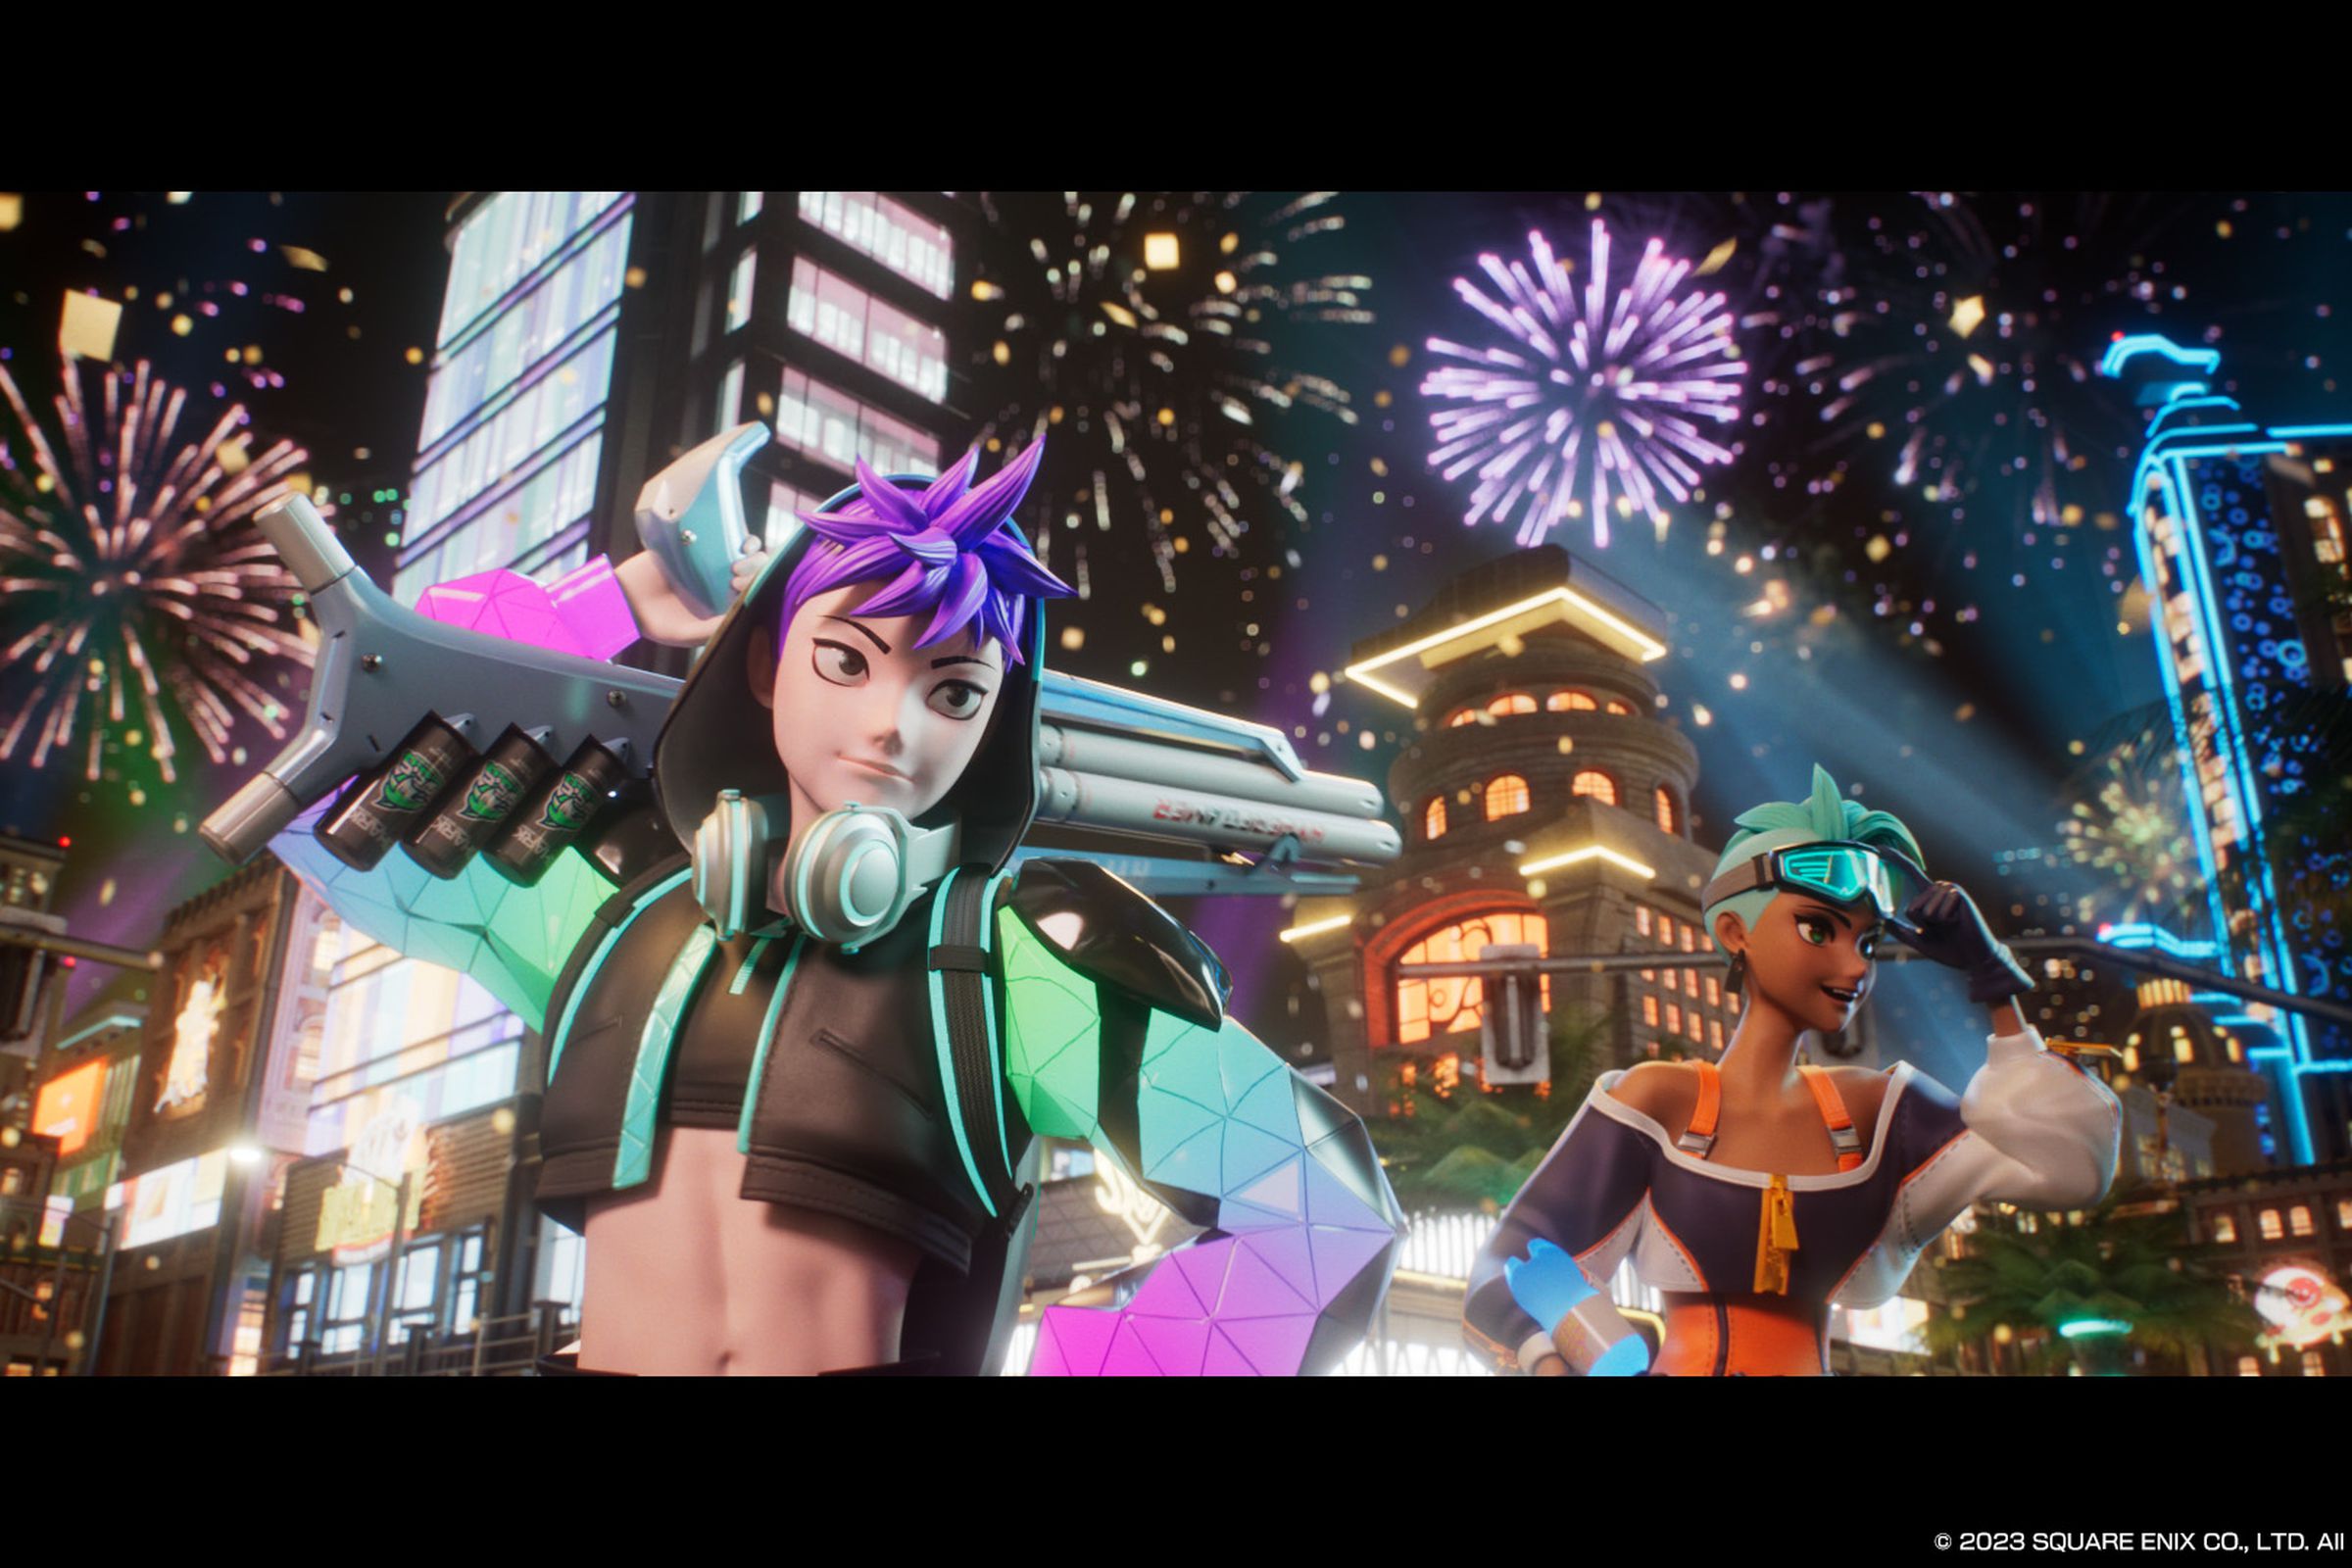 Screenshot from Foamstars featuring two humans in brightly colored futuristic clothing stand in a city lit by fireworks.